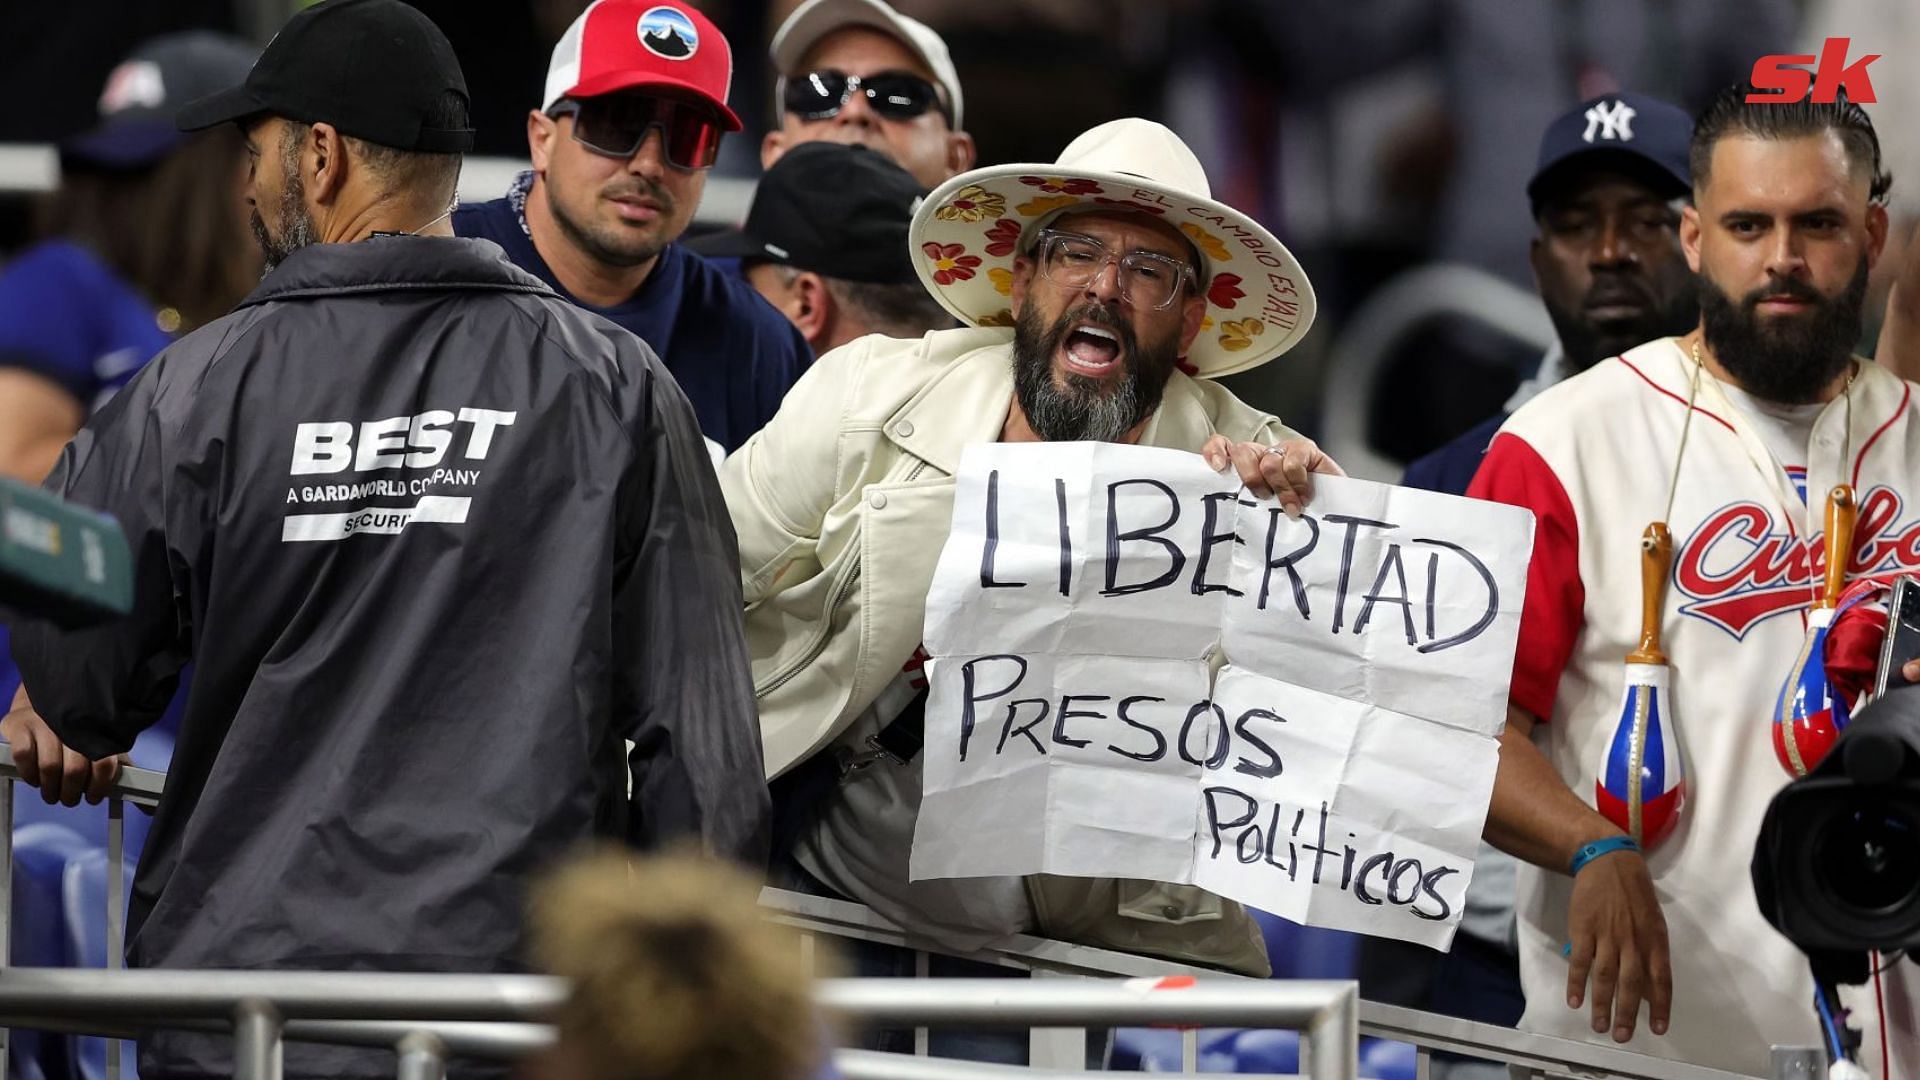 USA vs Cuba WBC semi-final interrupted by activists demanding end of Communist rule in Caribbean nation